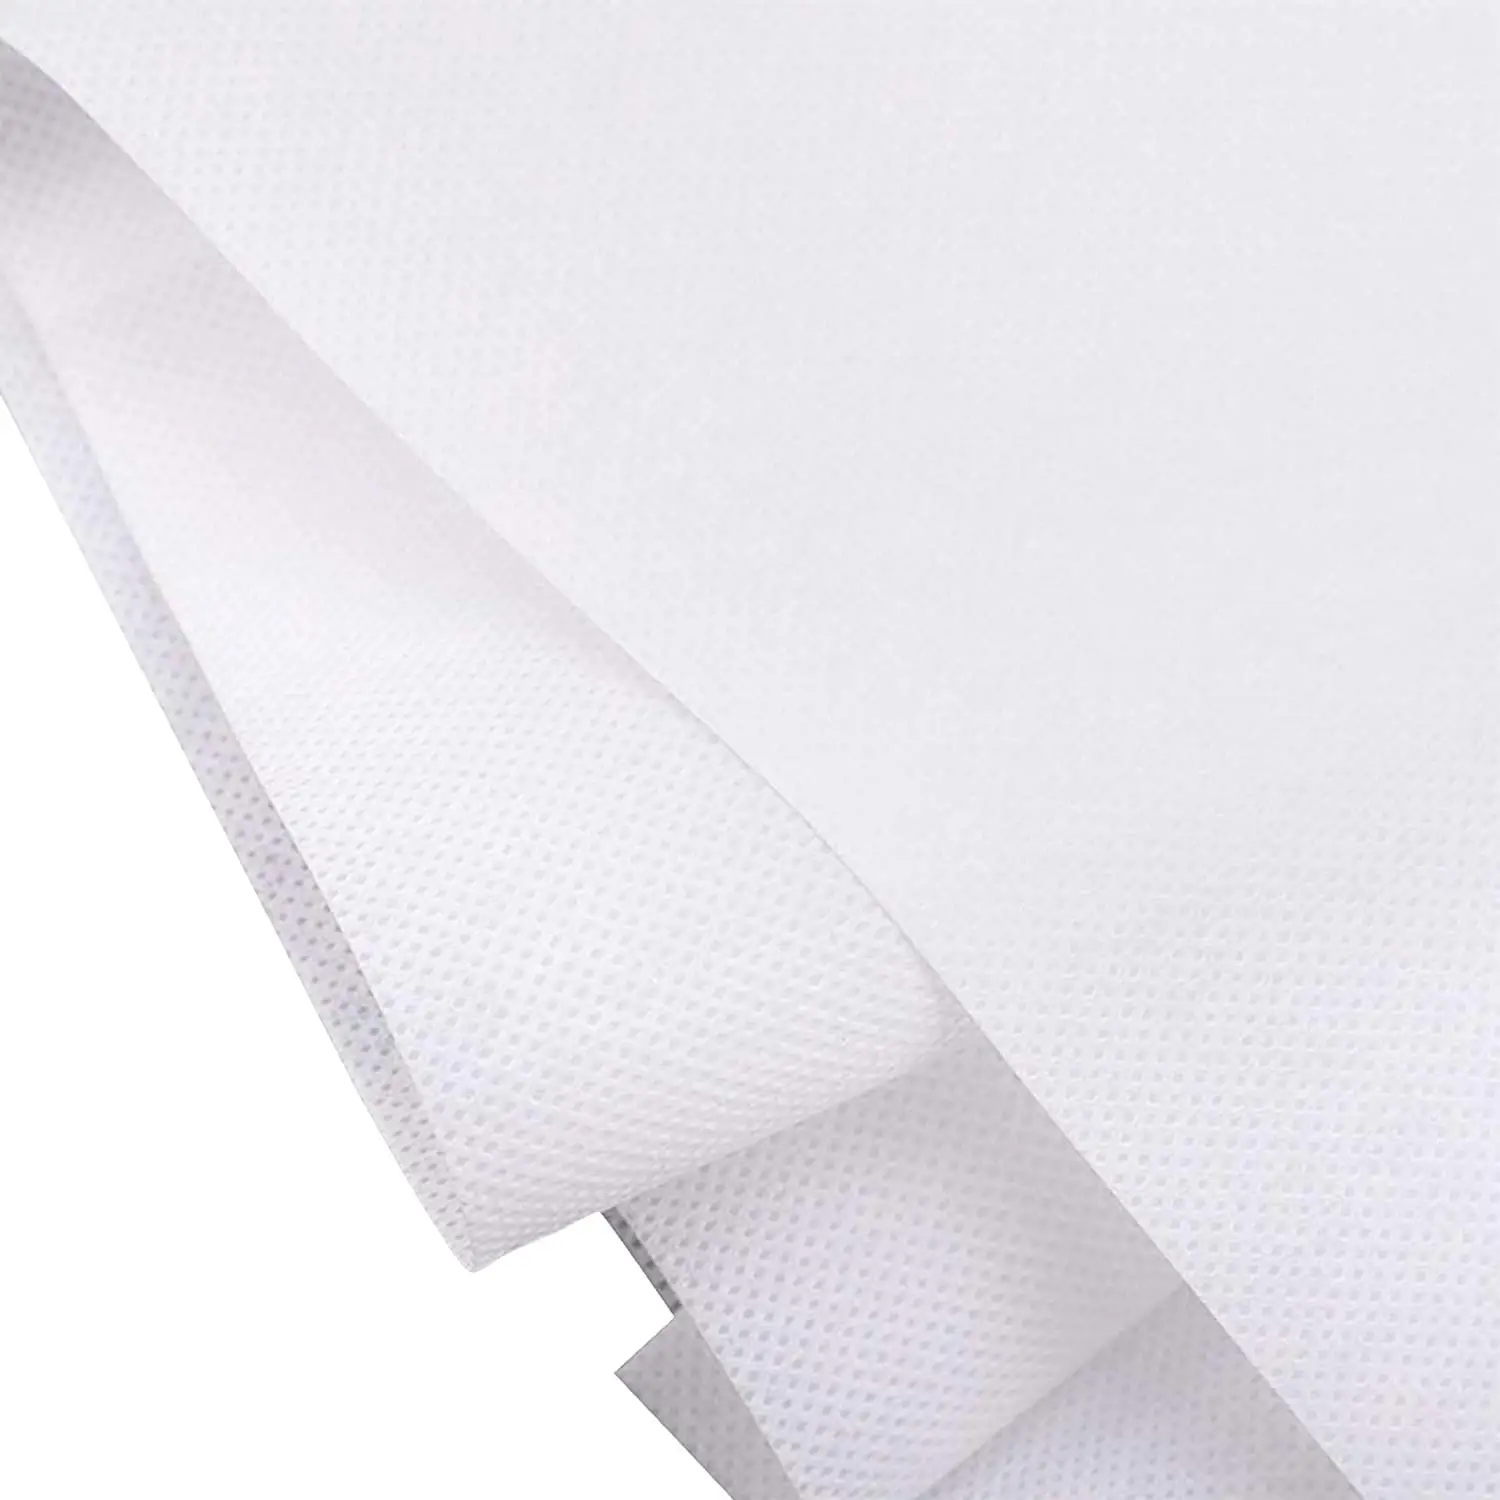 Hot Sale Soft Eco Friendly Nonwoven Waterproof Fabric Textile Raw Material Fabric